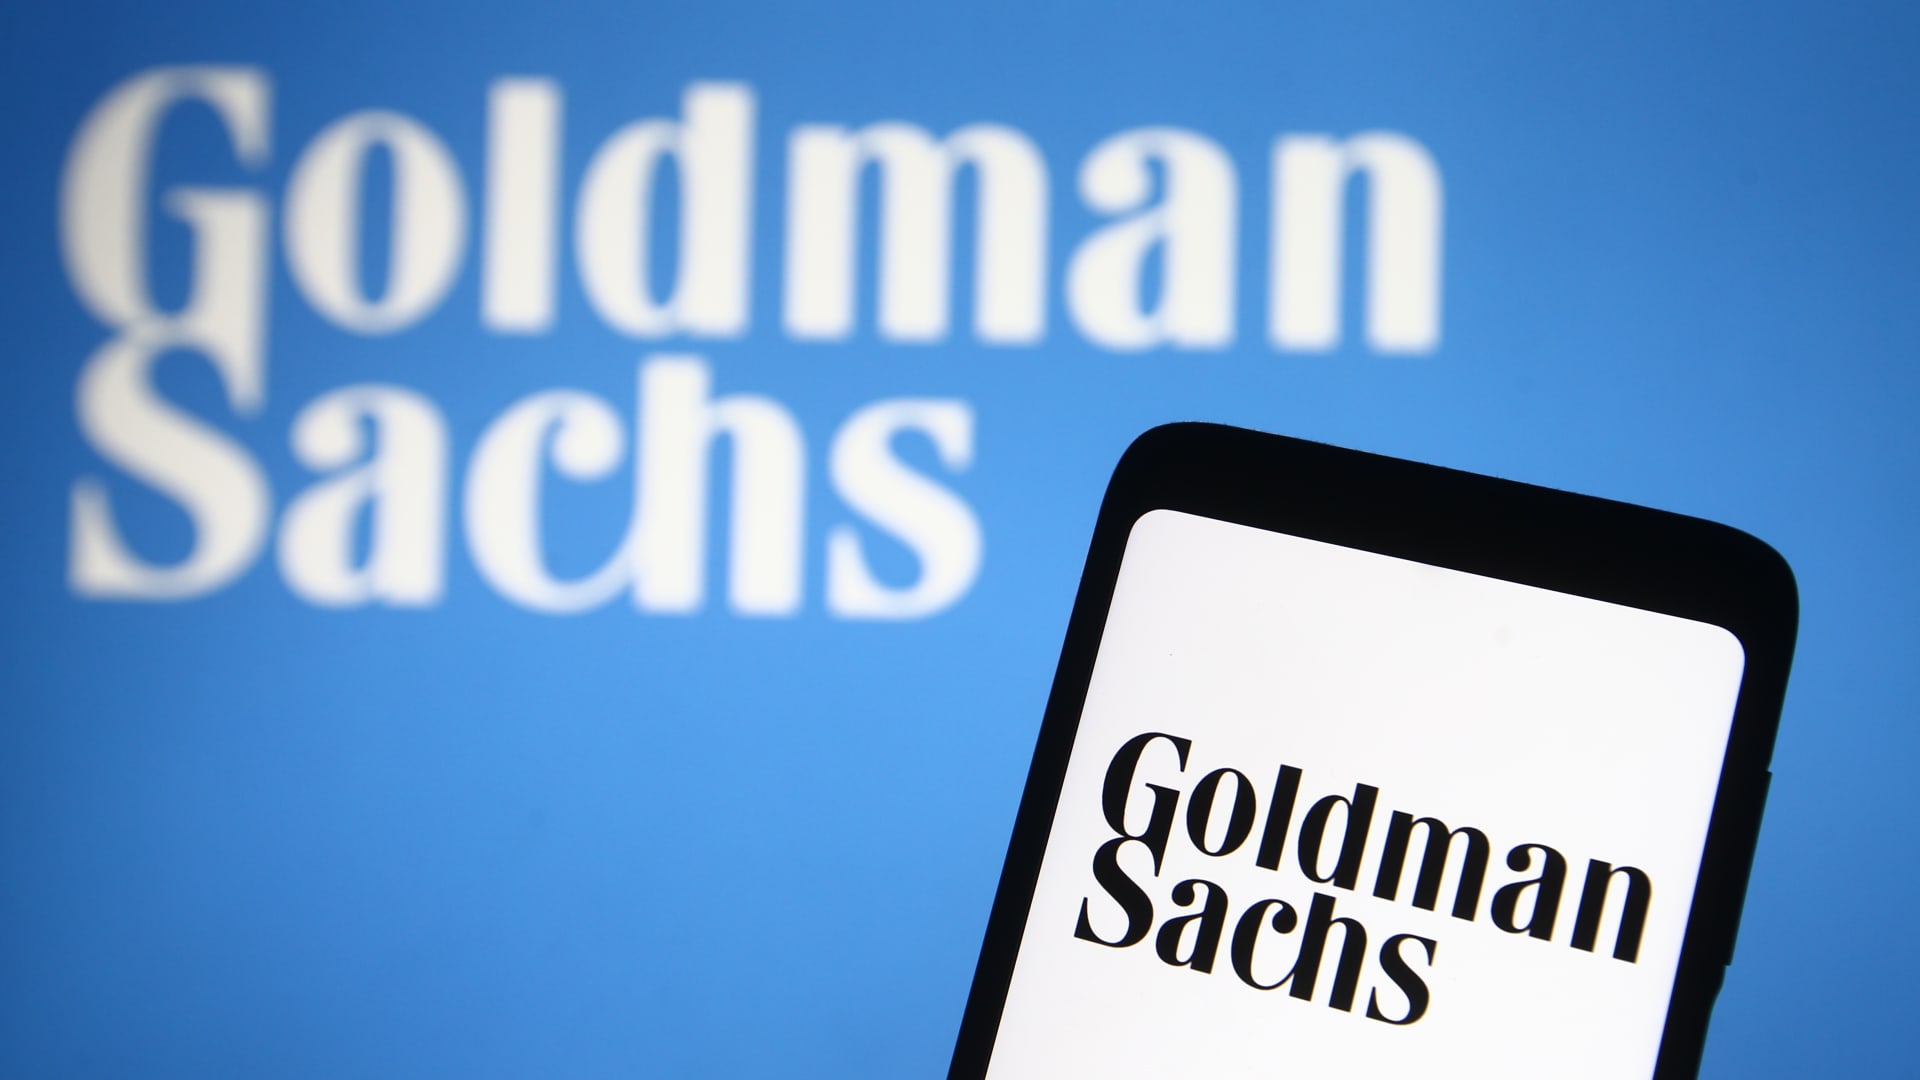 Stocks making the biggest moves in the premarket: Goldman Sachs, Synchrony Financial, Coinbase and more